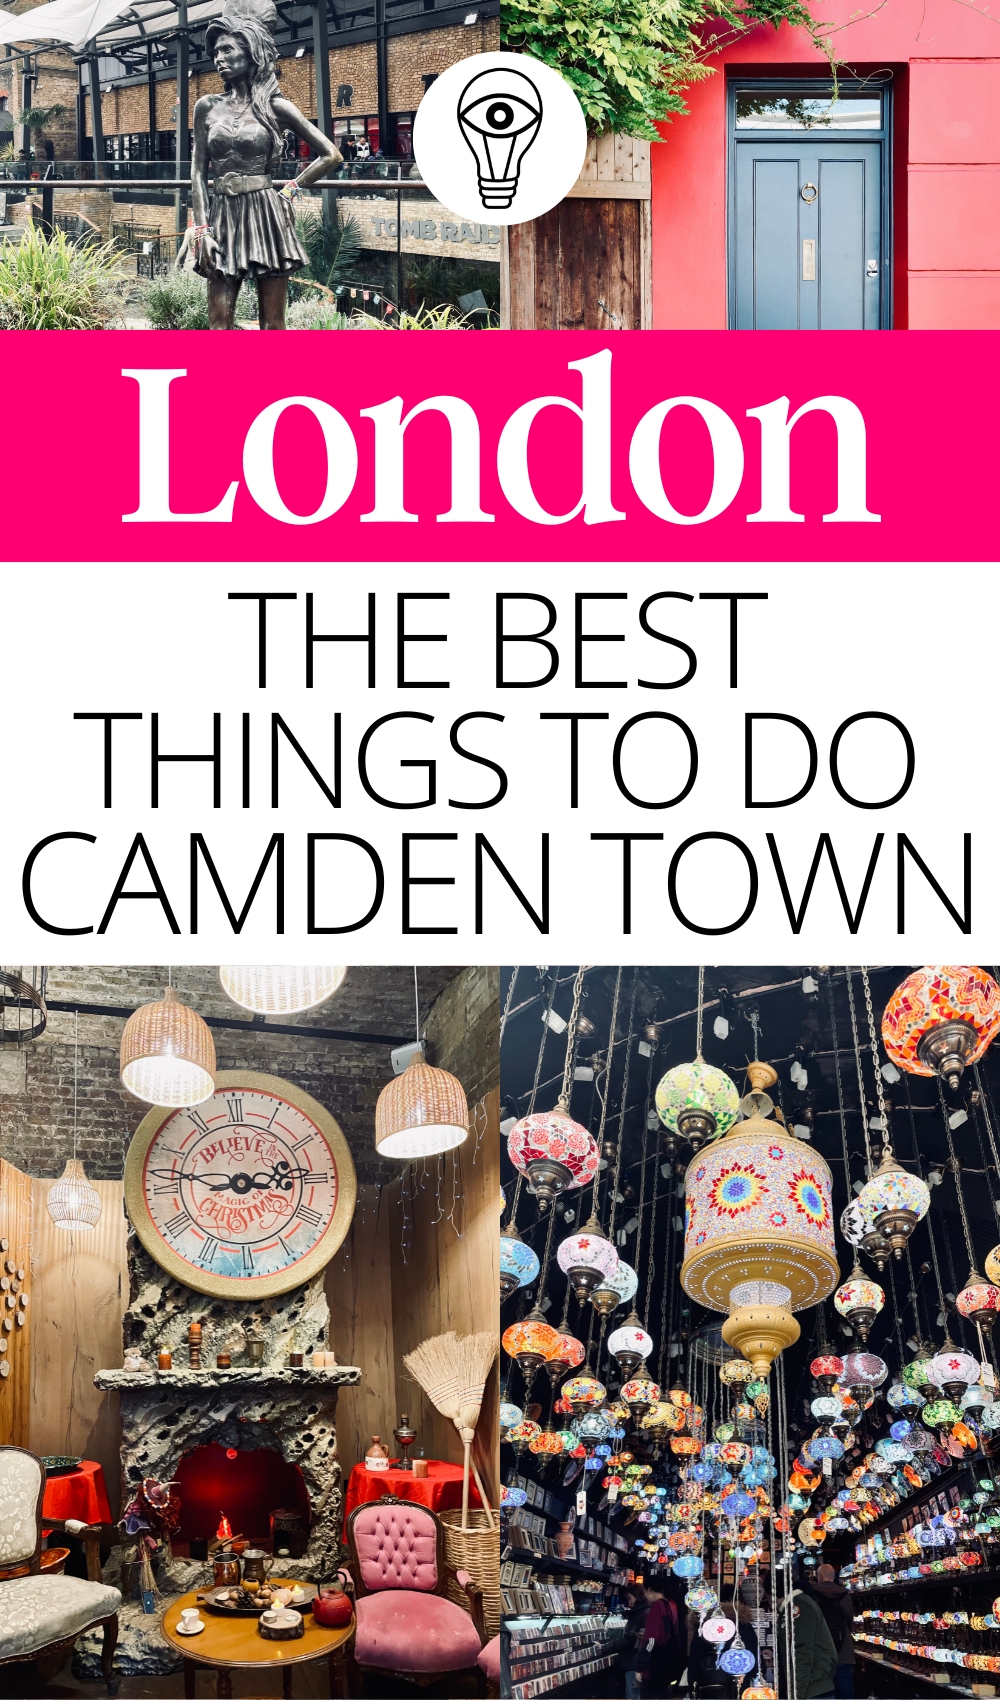 best things to do in camden market - free things to do in camden town - secret things to do in camden - best free things to do in London - best things to do in london with kids 